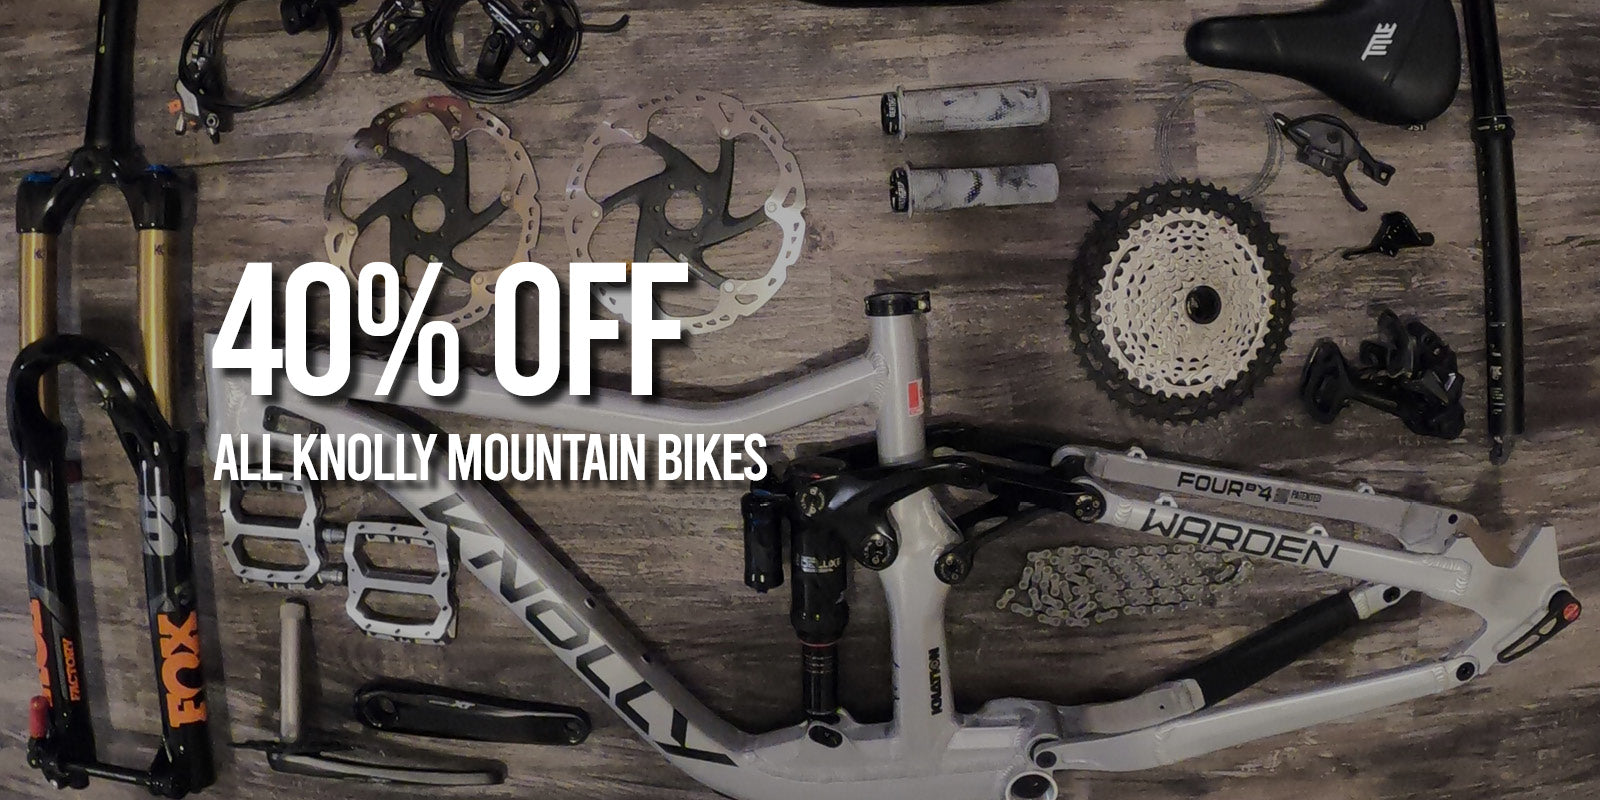 Black Friday Clearance Sale on Knolly Mountain Bikes - Up to 40% Off Frames and Complete Bikes